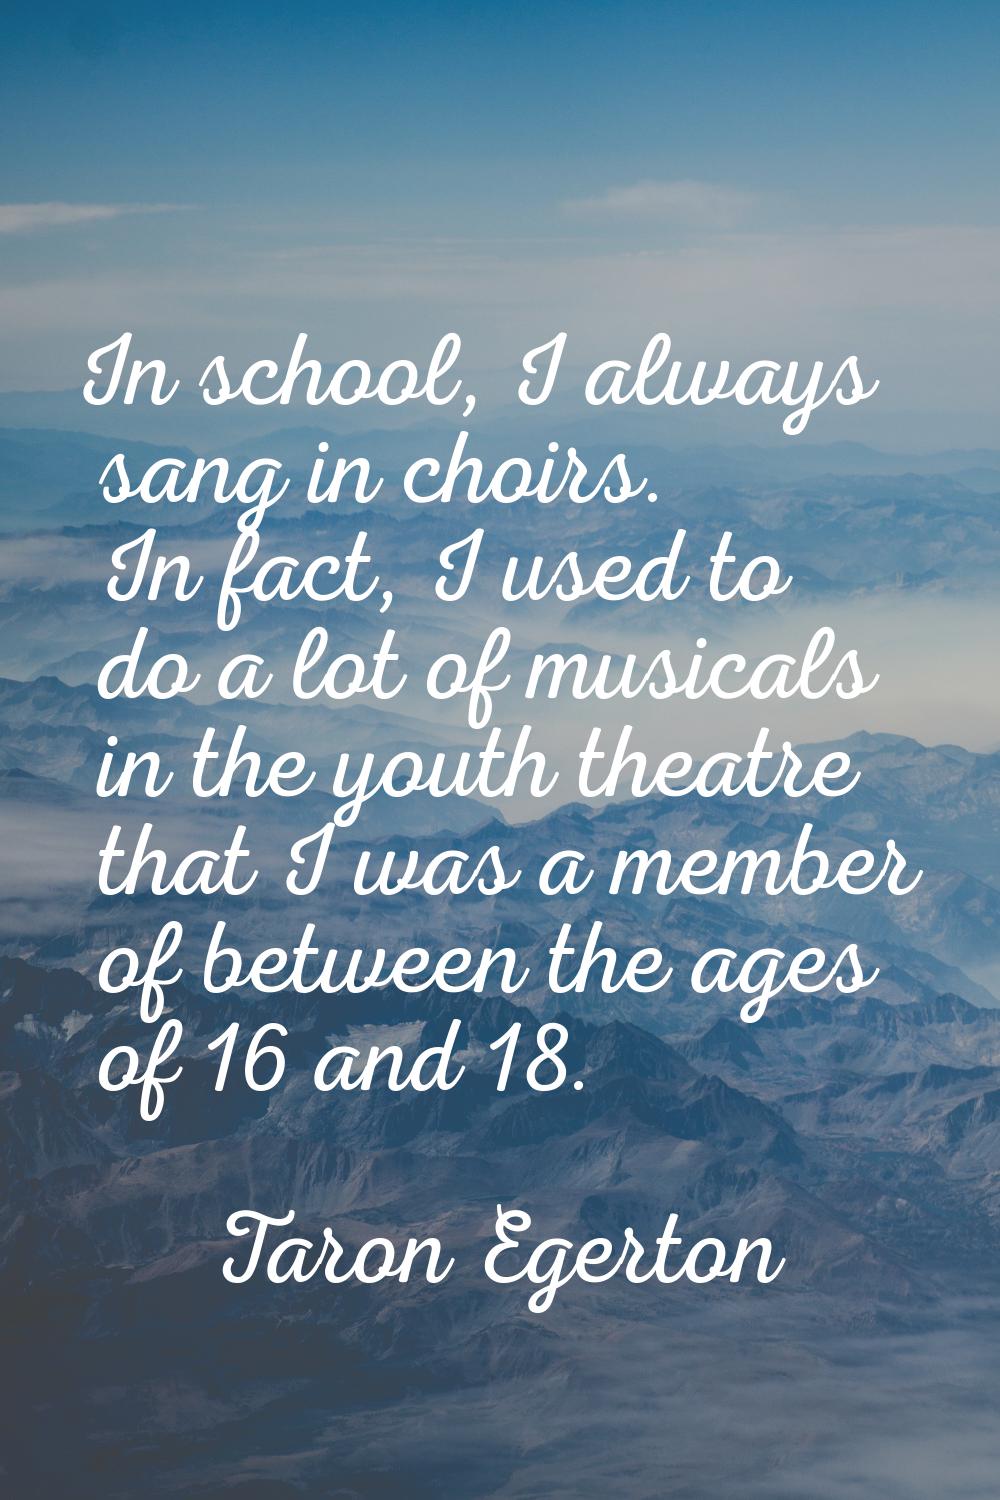 In school, I always sang in choirs. In fact, I used to do a lot of musicals in the youth theatre th